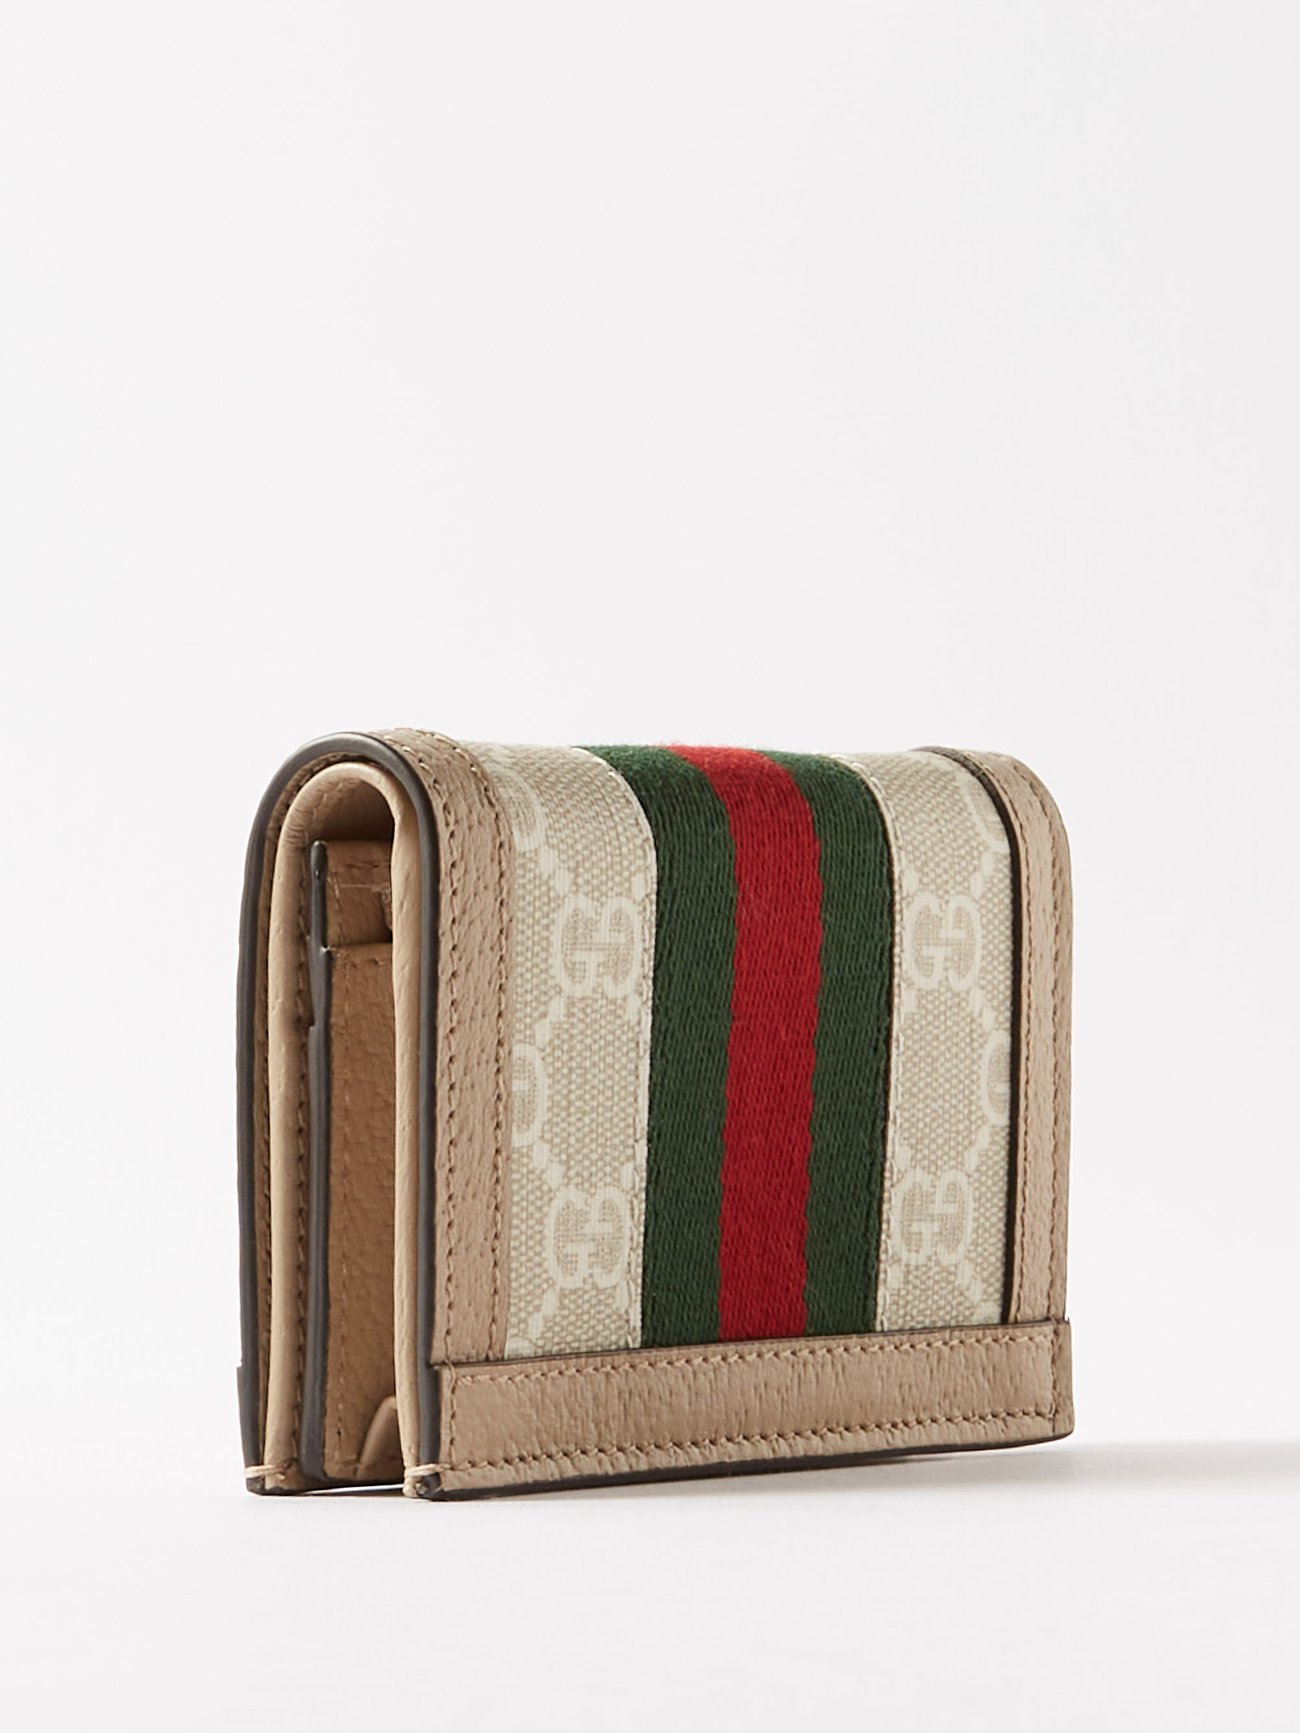 GUCCI Ophidia Textured Leather-trimmed Printed Coated-canvas Cardholder - Beige - one size